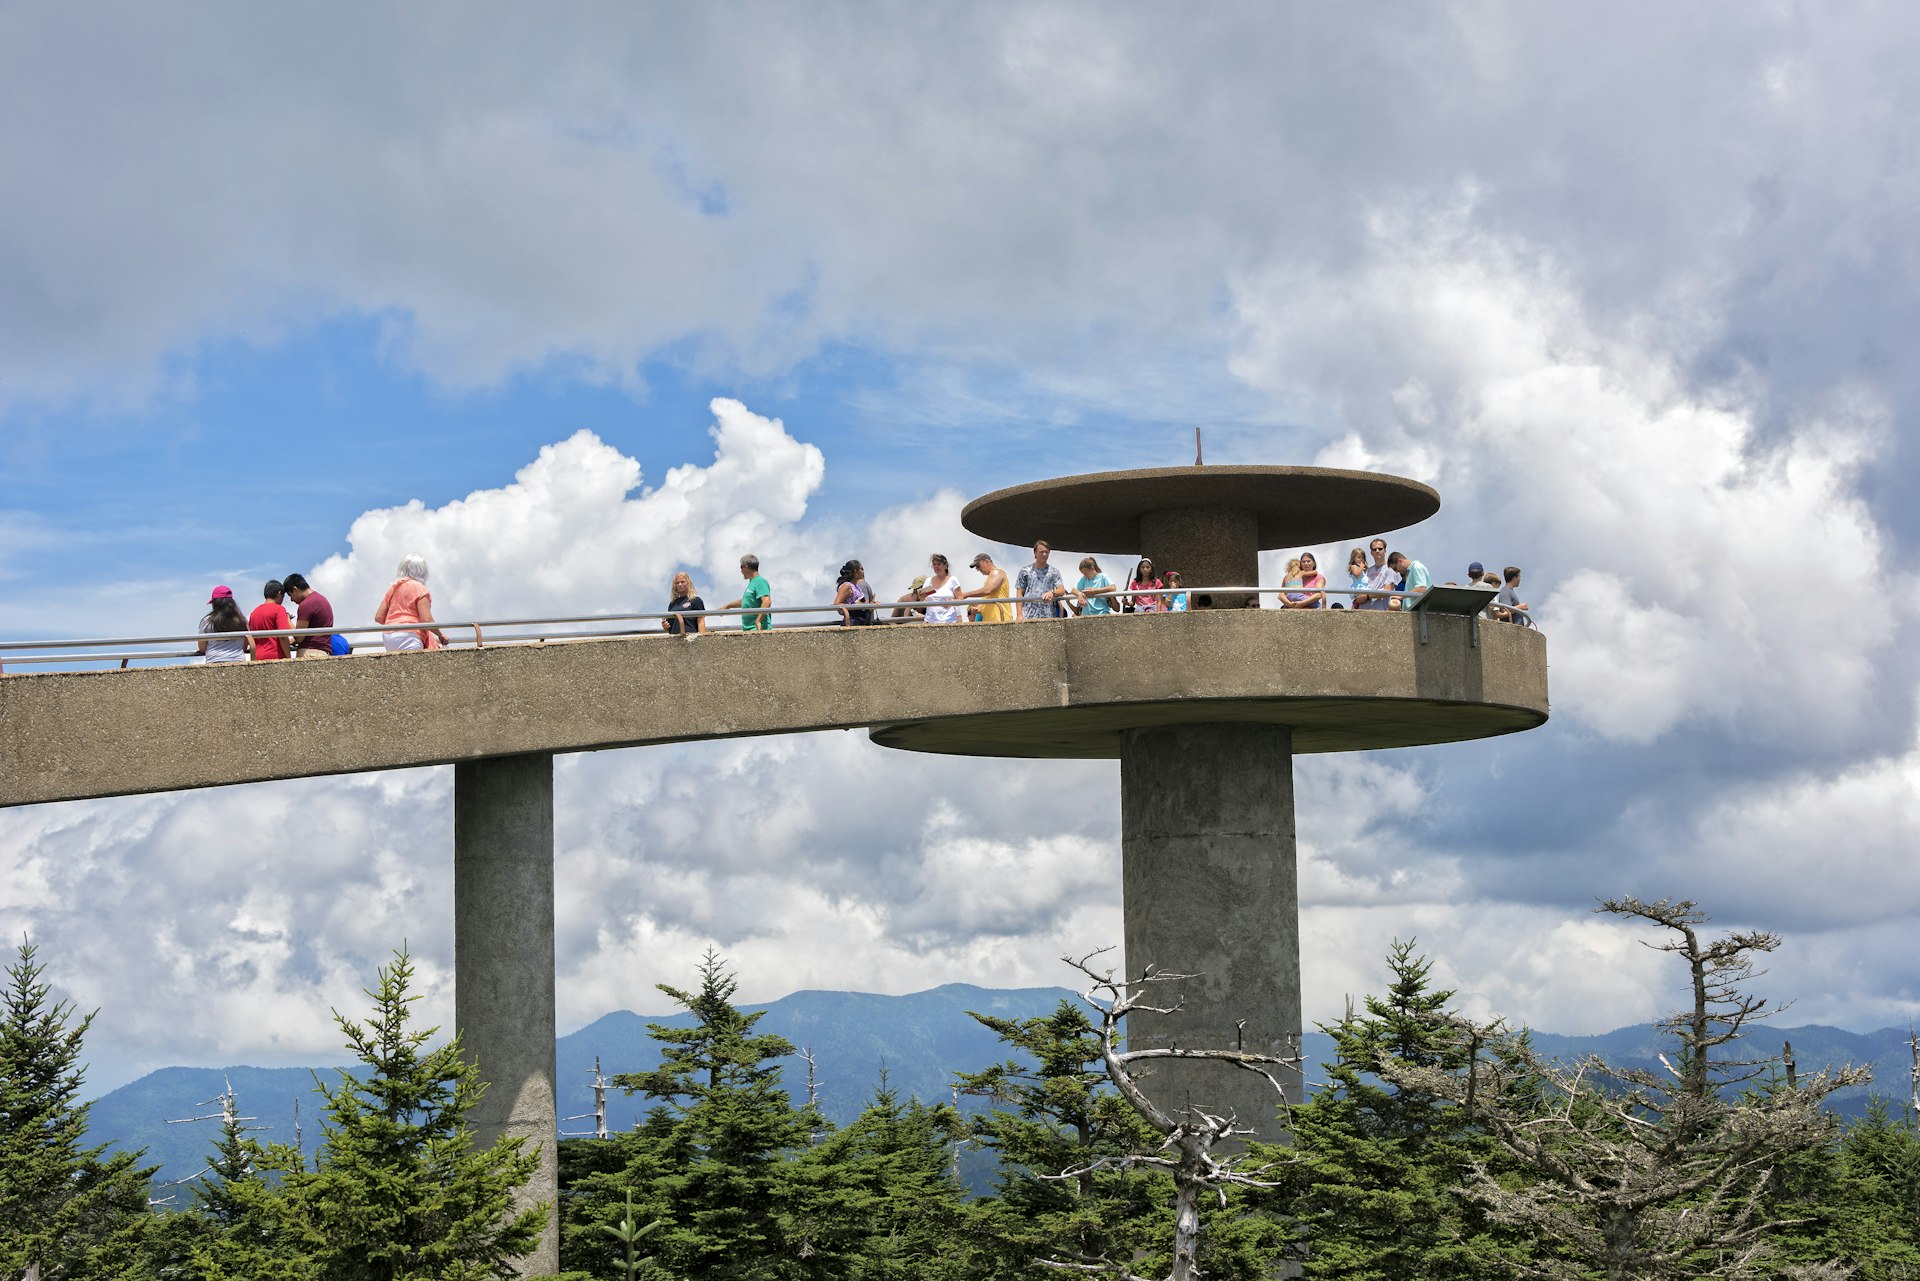 A sweeping concrete walkway leads to an observation tower high above the treeline in a national park